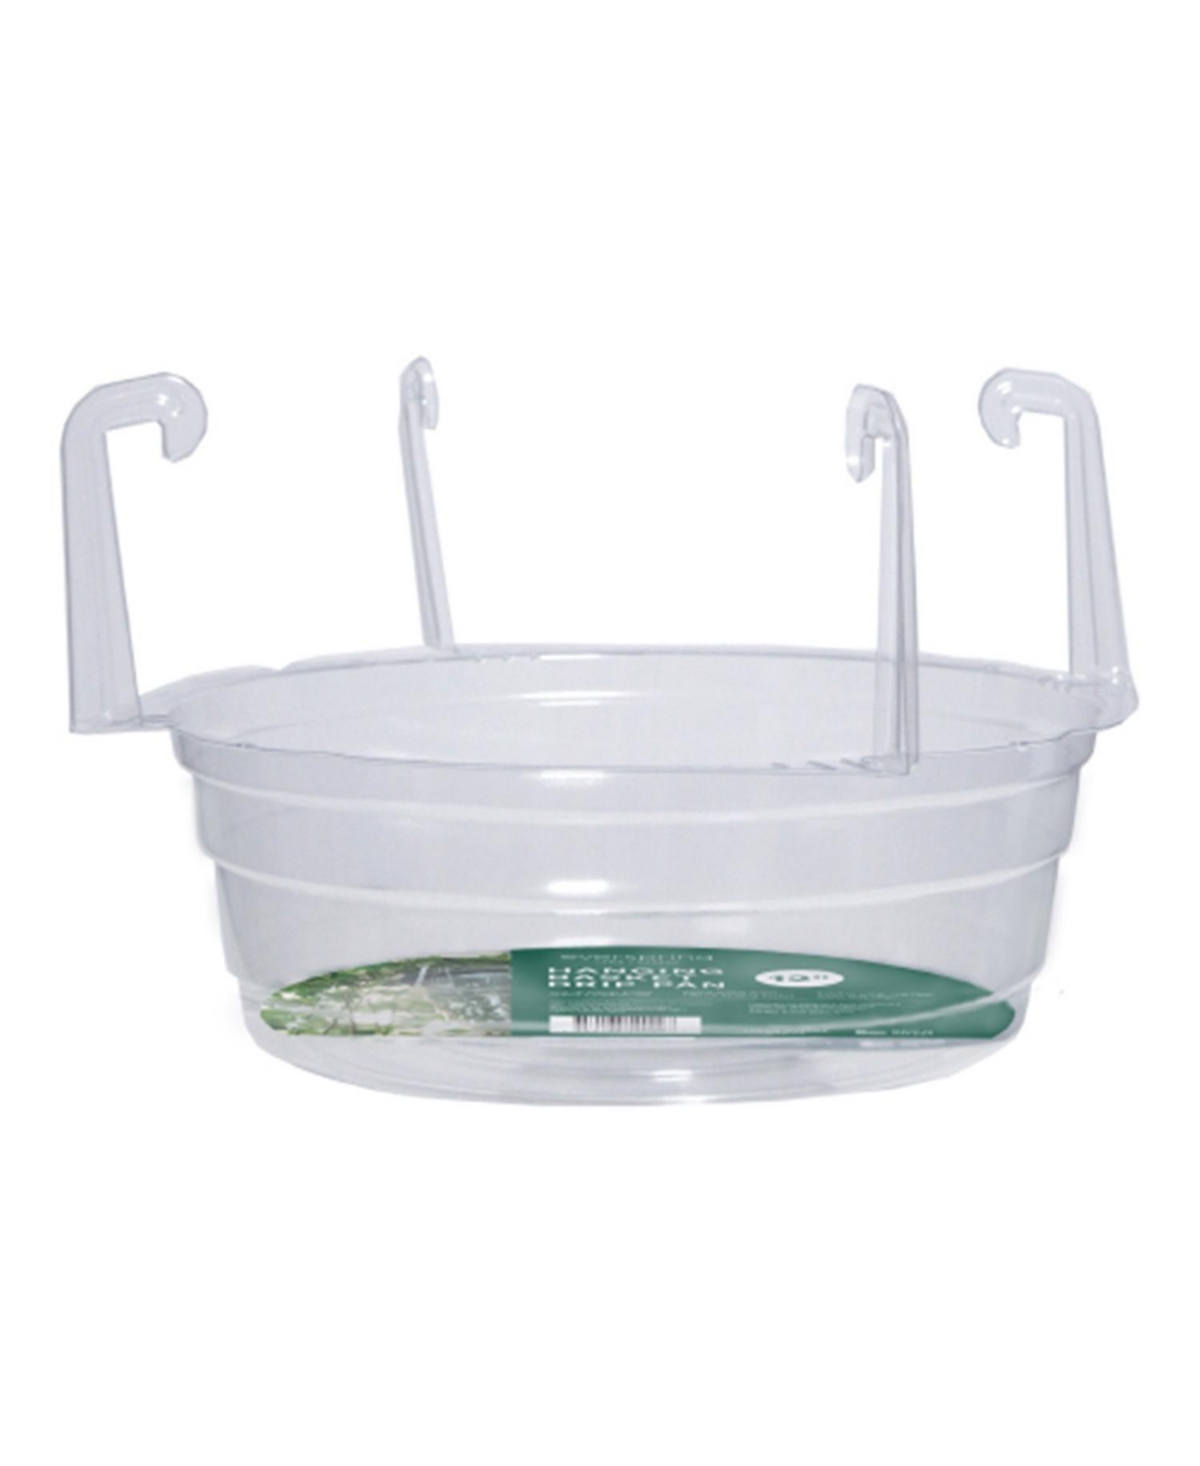 Curtis Wagner Hanging Basket Drip Pan, Clear, 12 HB1200 Qty 1 - Clear